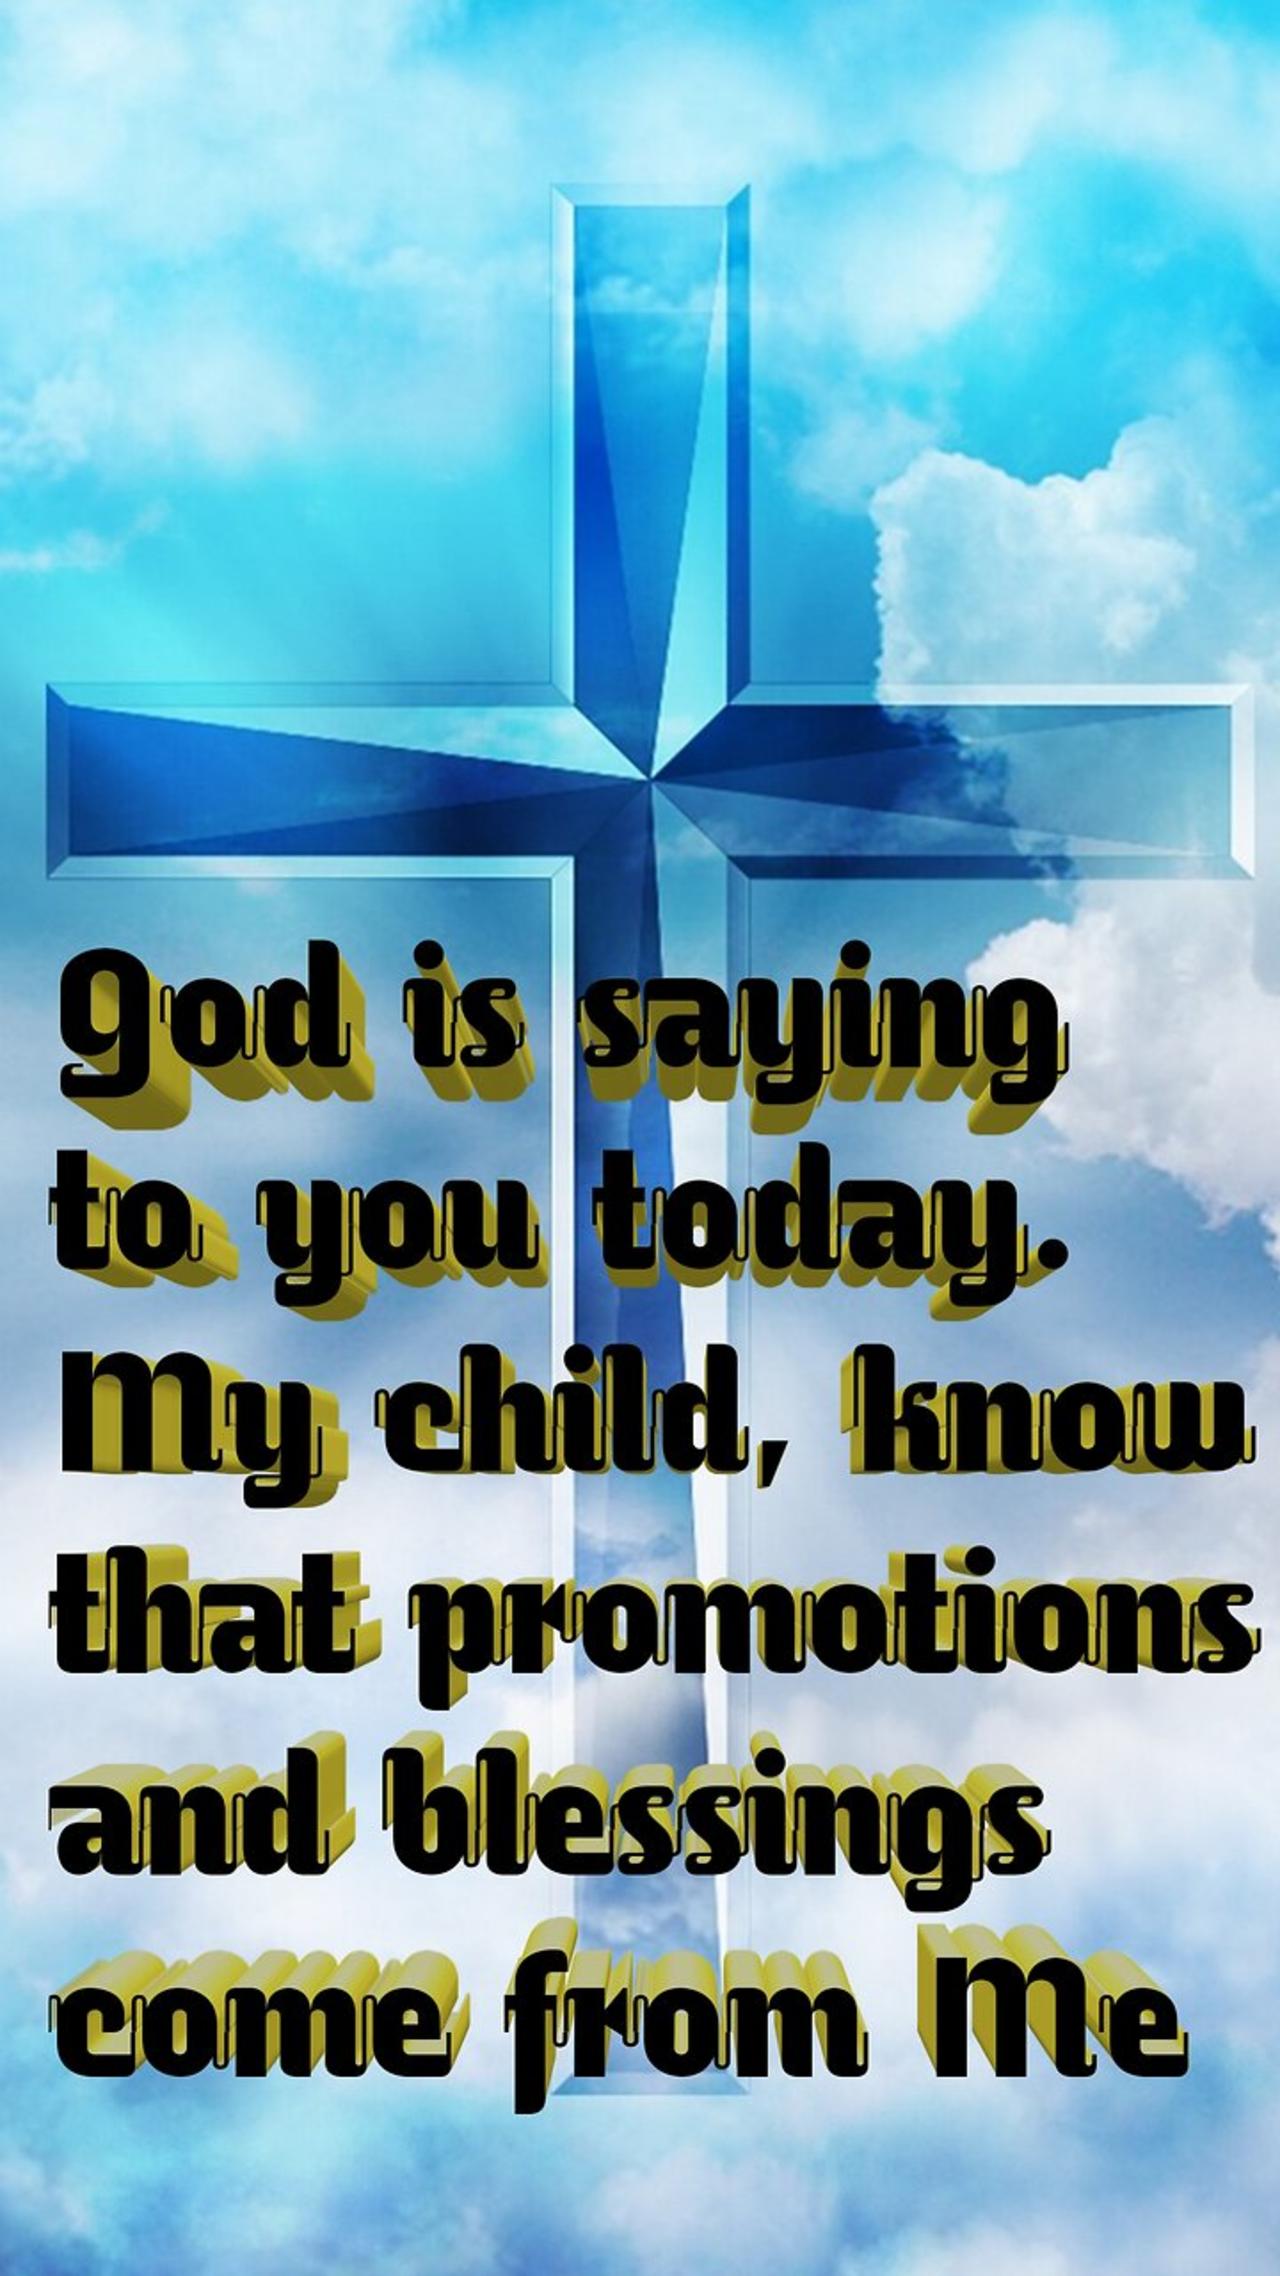 God is saying to you today / God says / God message today / Jesus Christ /